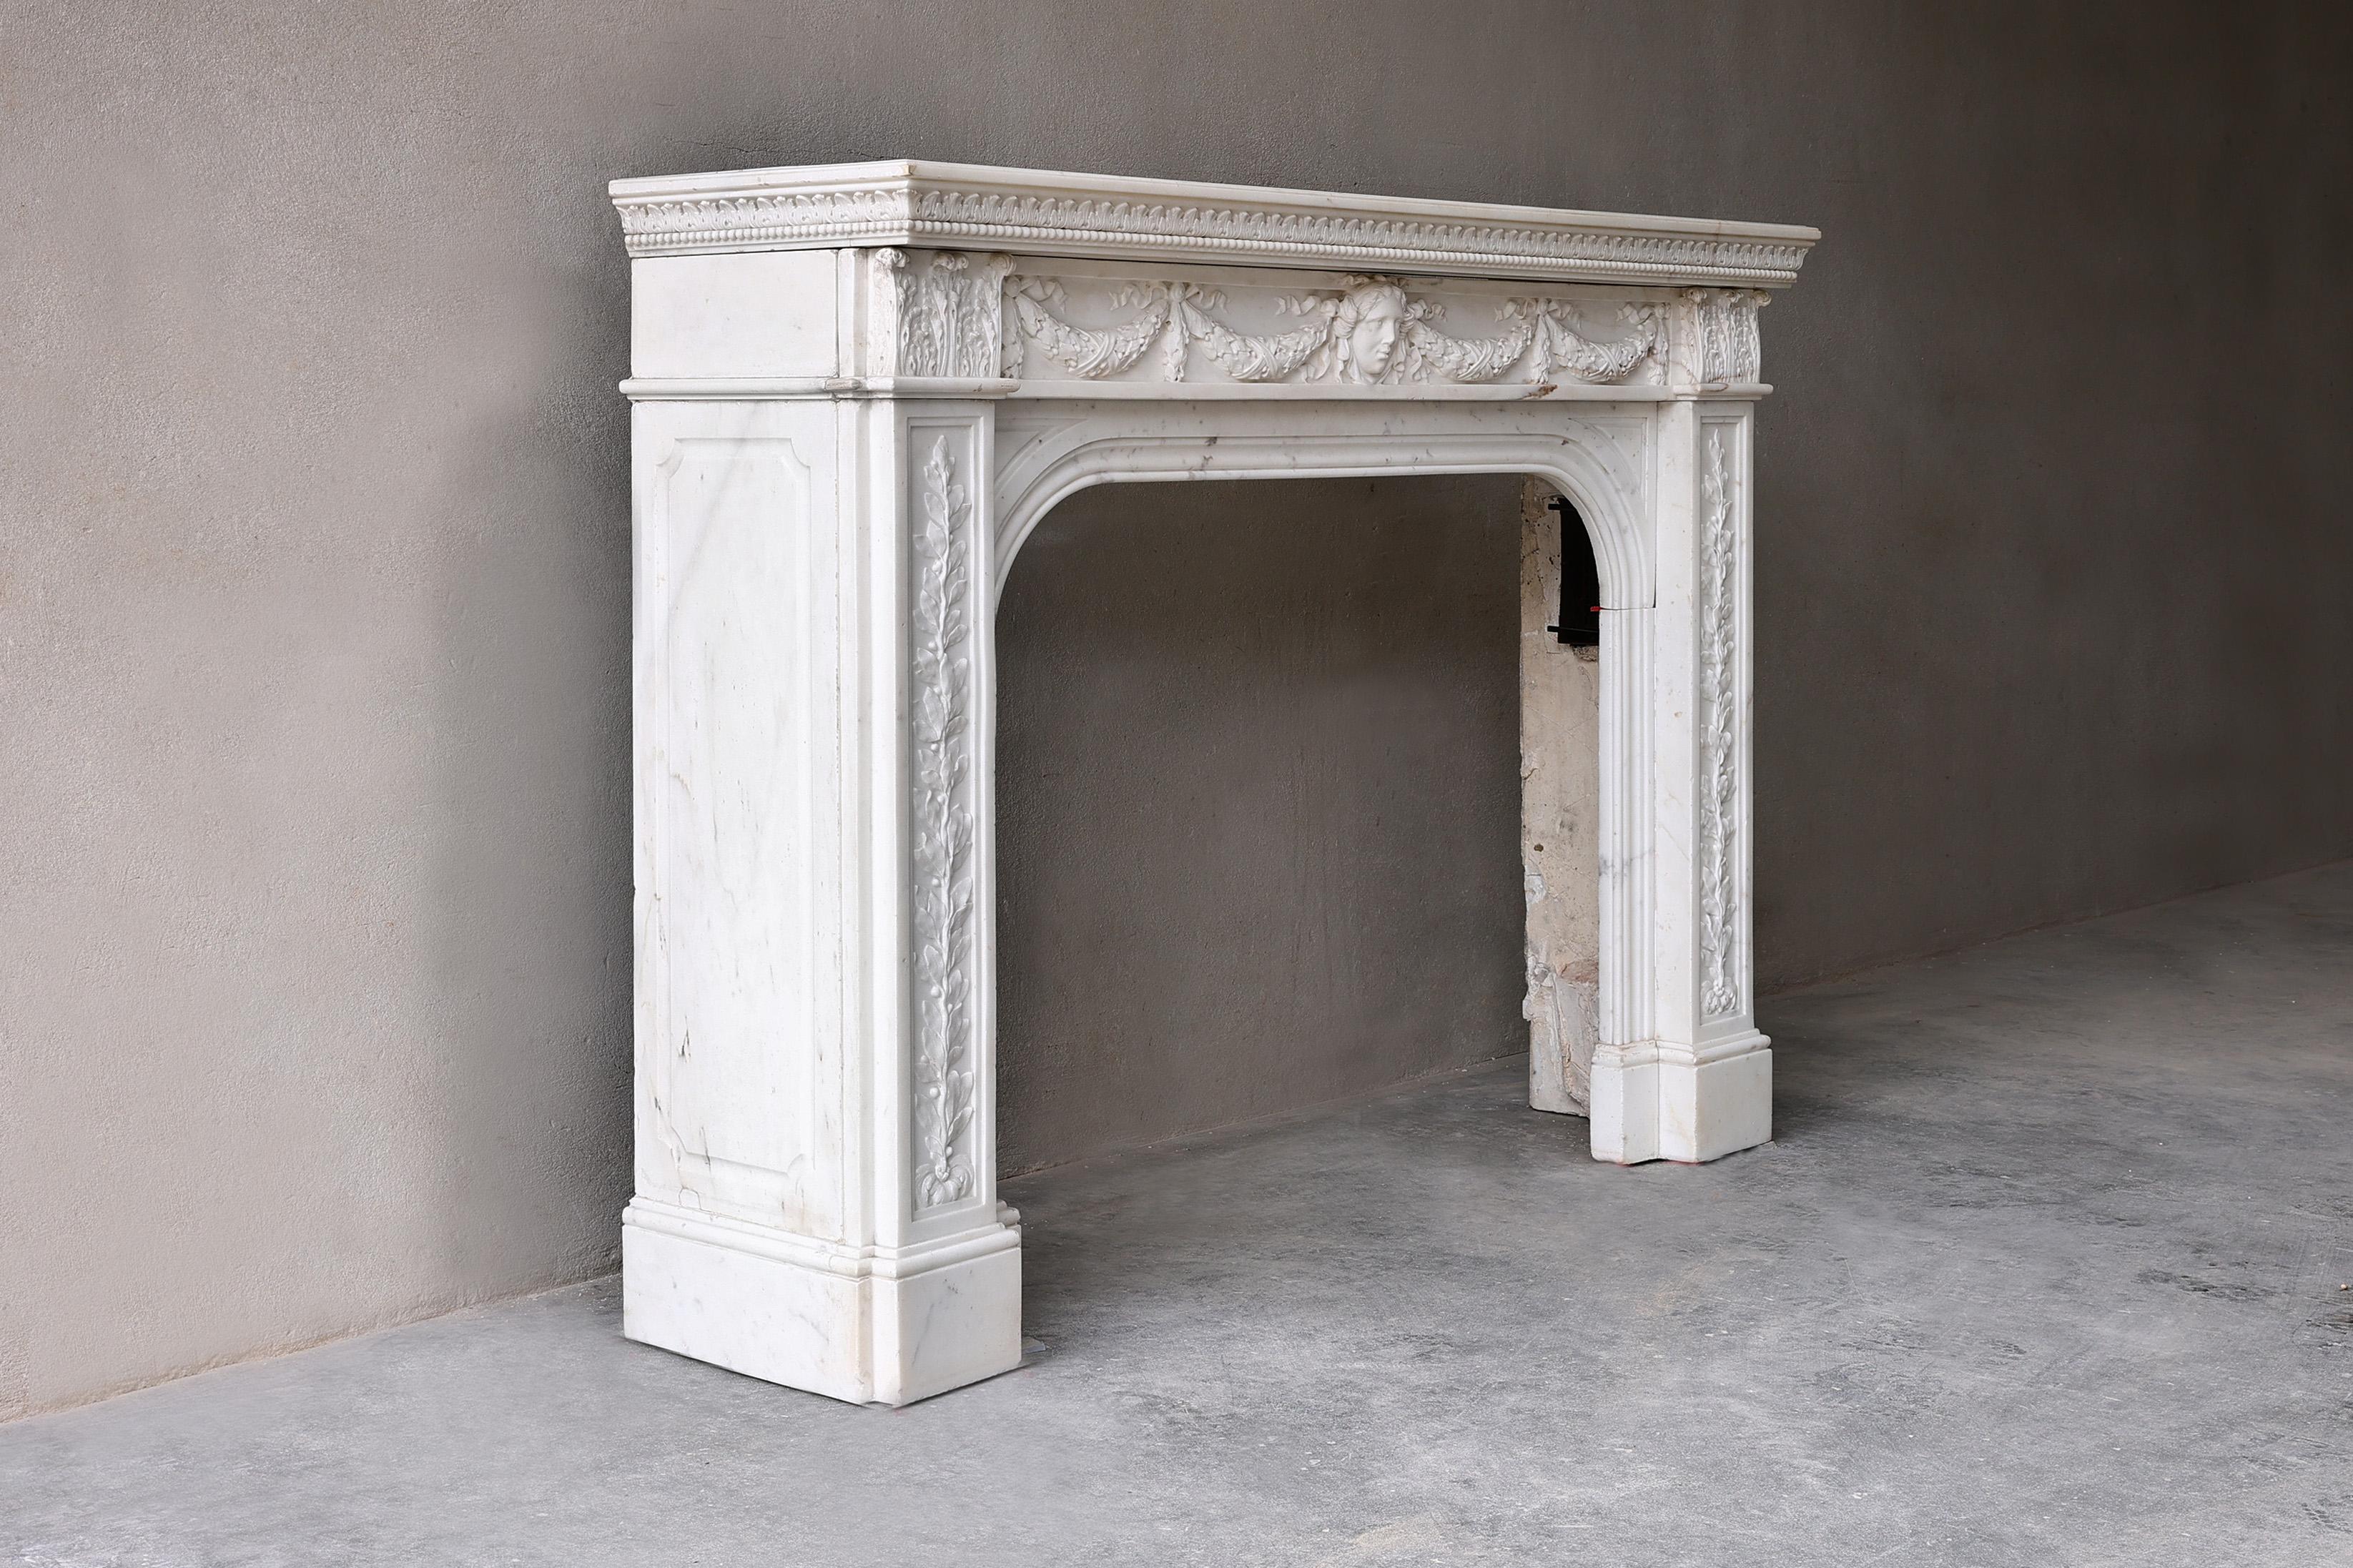 Beautiful antique fireplace from the 19th century in English Regency style! This fireplace has a very chic look and many decorations and ornaments, such as acanthus leaves. An elegant Carrara marble fireplace that fits in many interiors in terms of